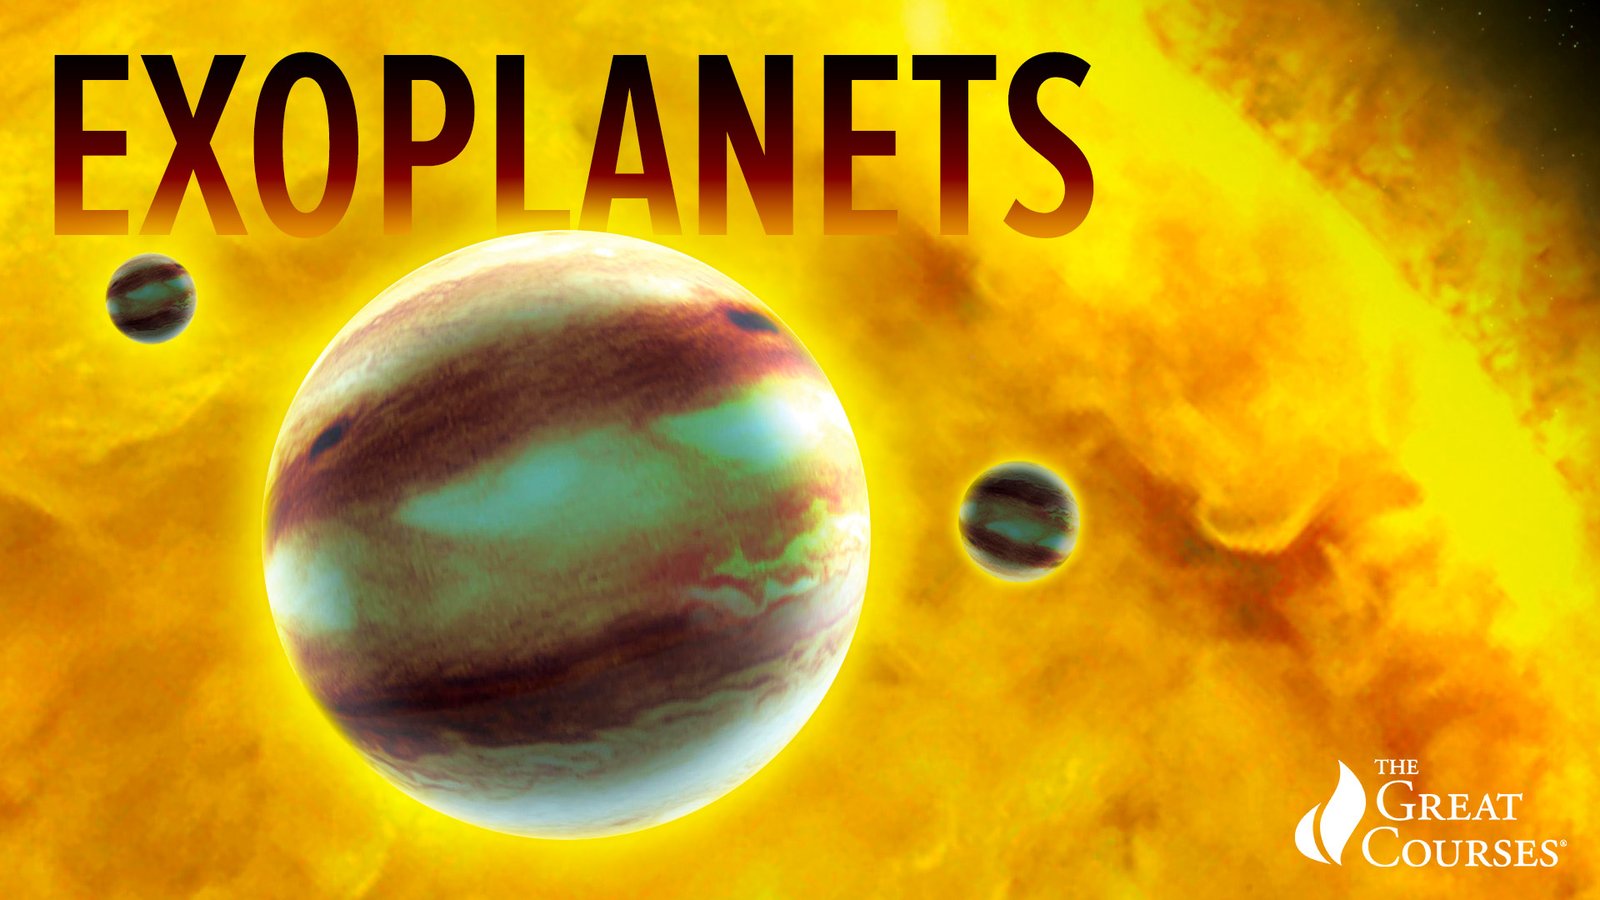 The Search for Exoplanets: What Astronomers Know